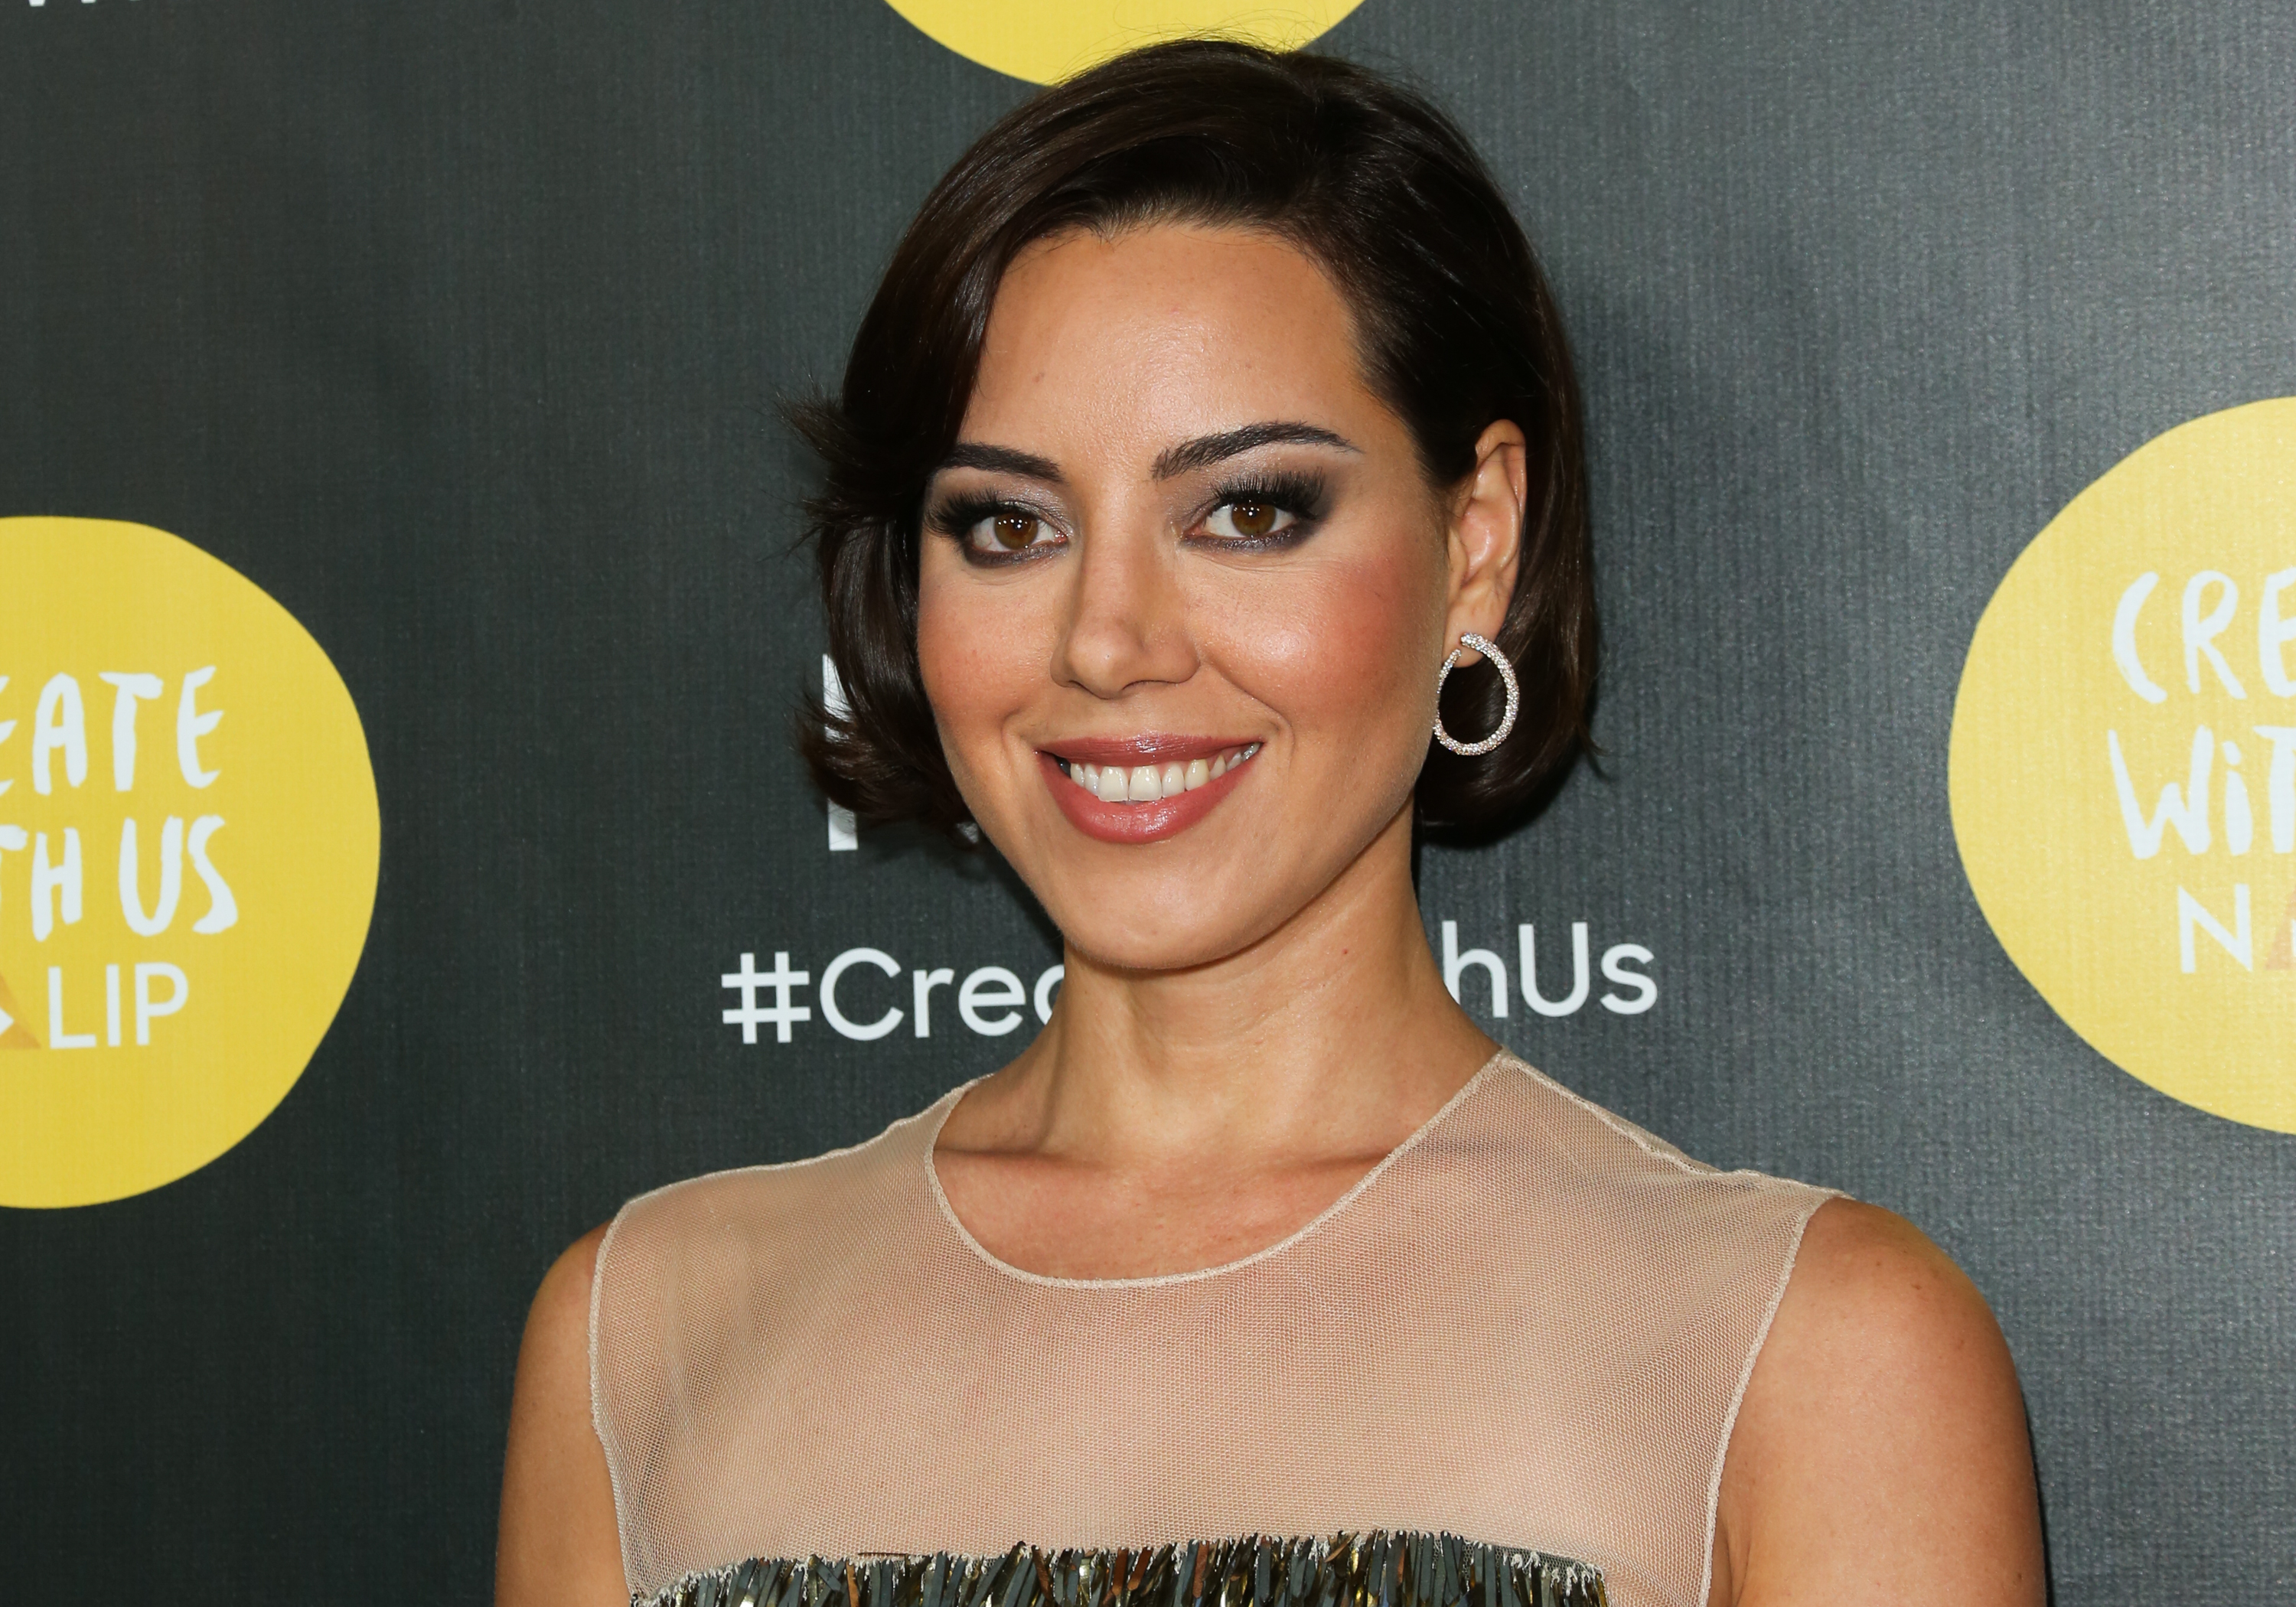 Actress Aubrey Plaza attends the NALIP 2016 Latino Media Awards at The Dolby Theatre on June 25, 2016 in Hollywood, California. (Paul Archuleta—FilmMagic/Getty Images)